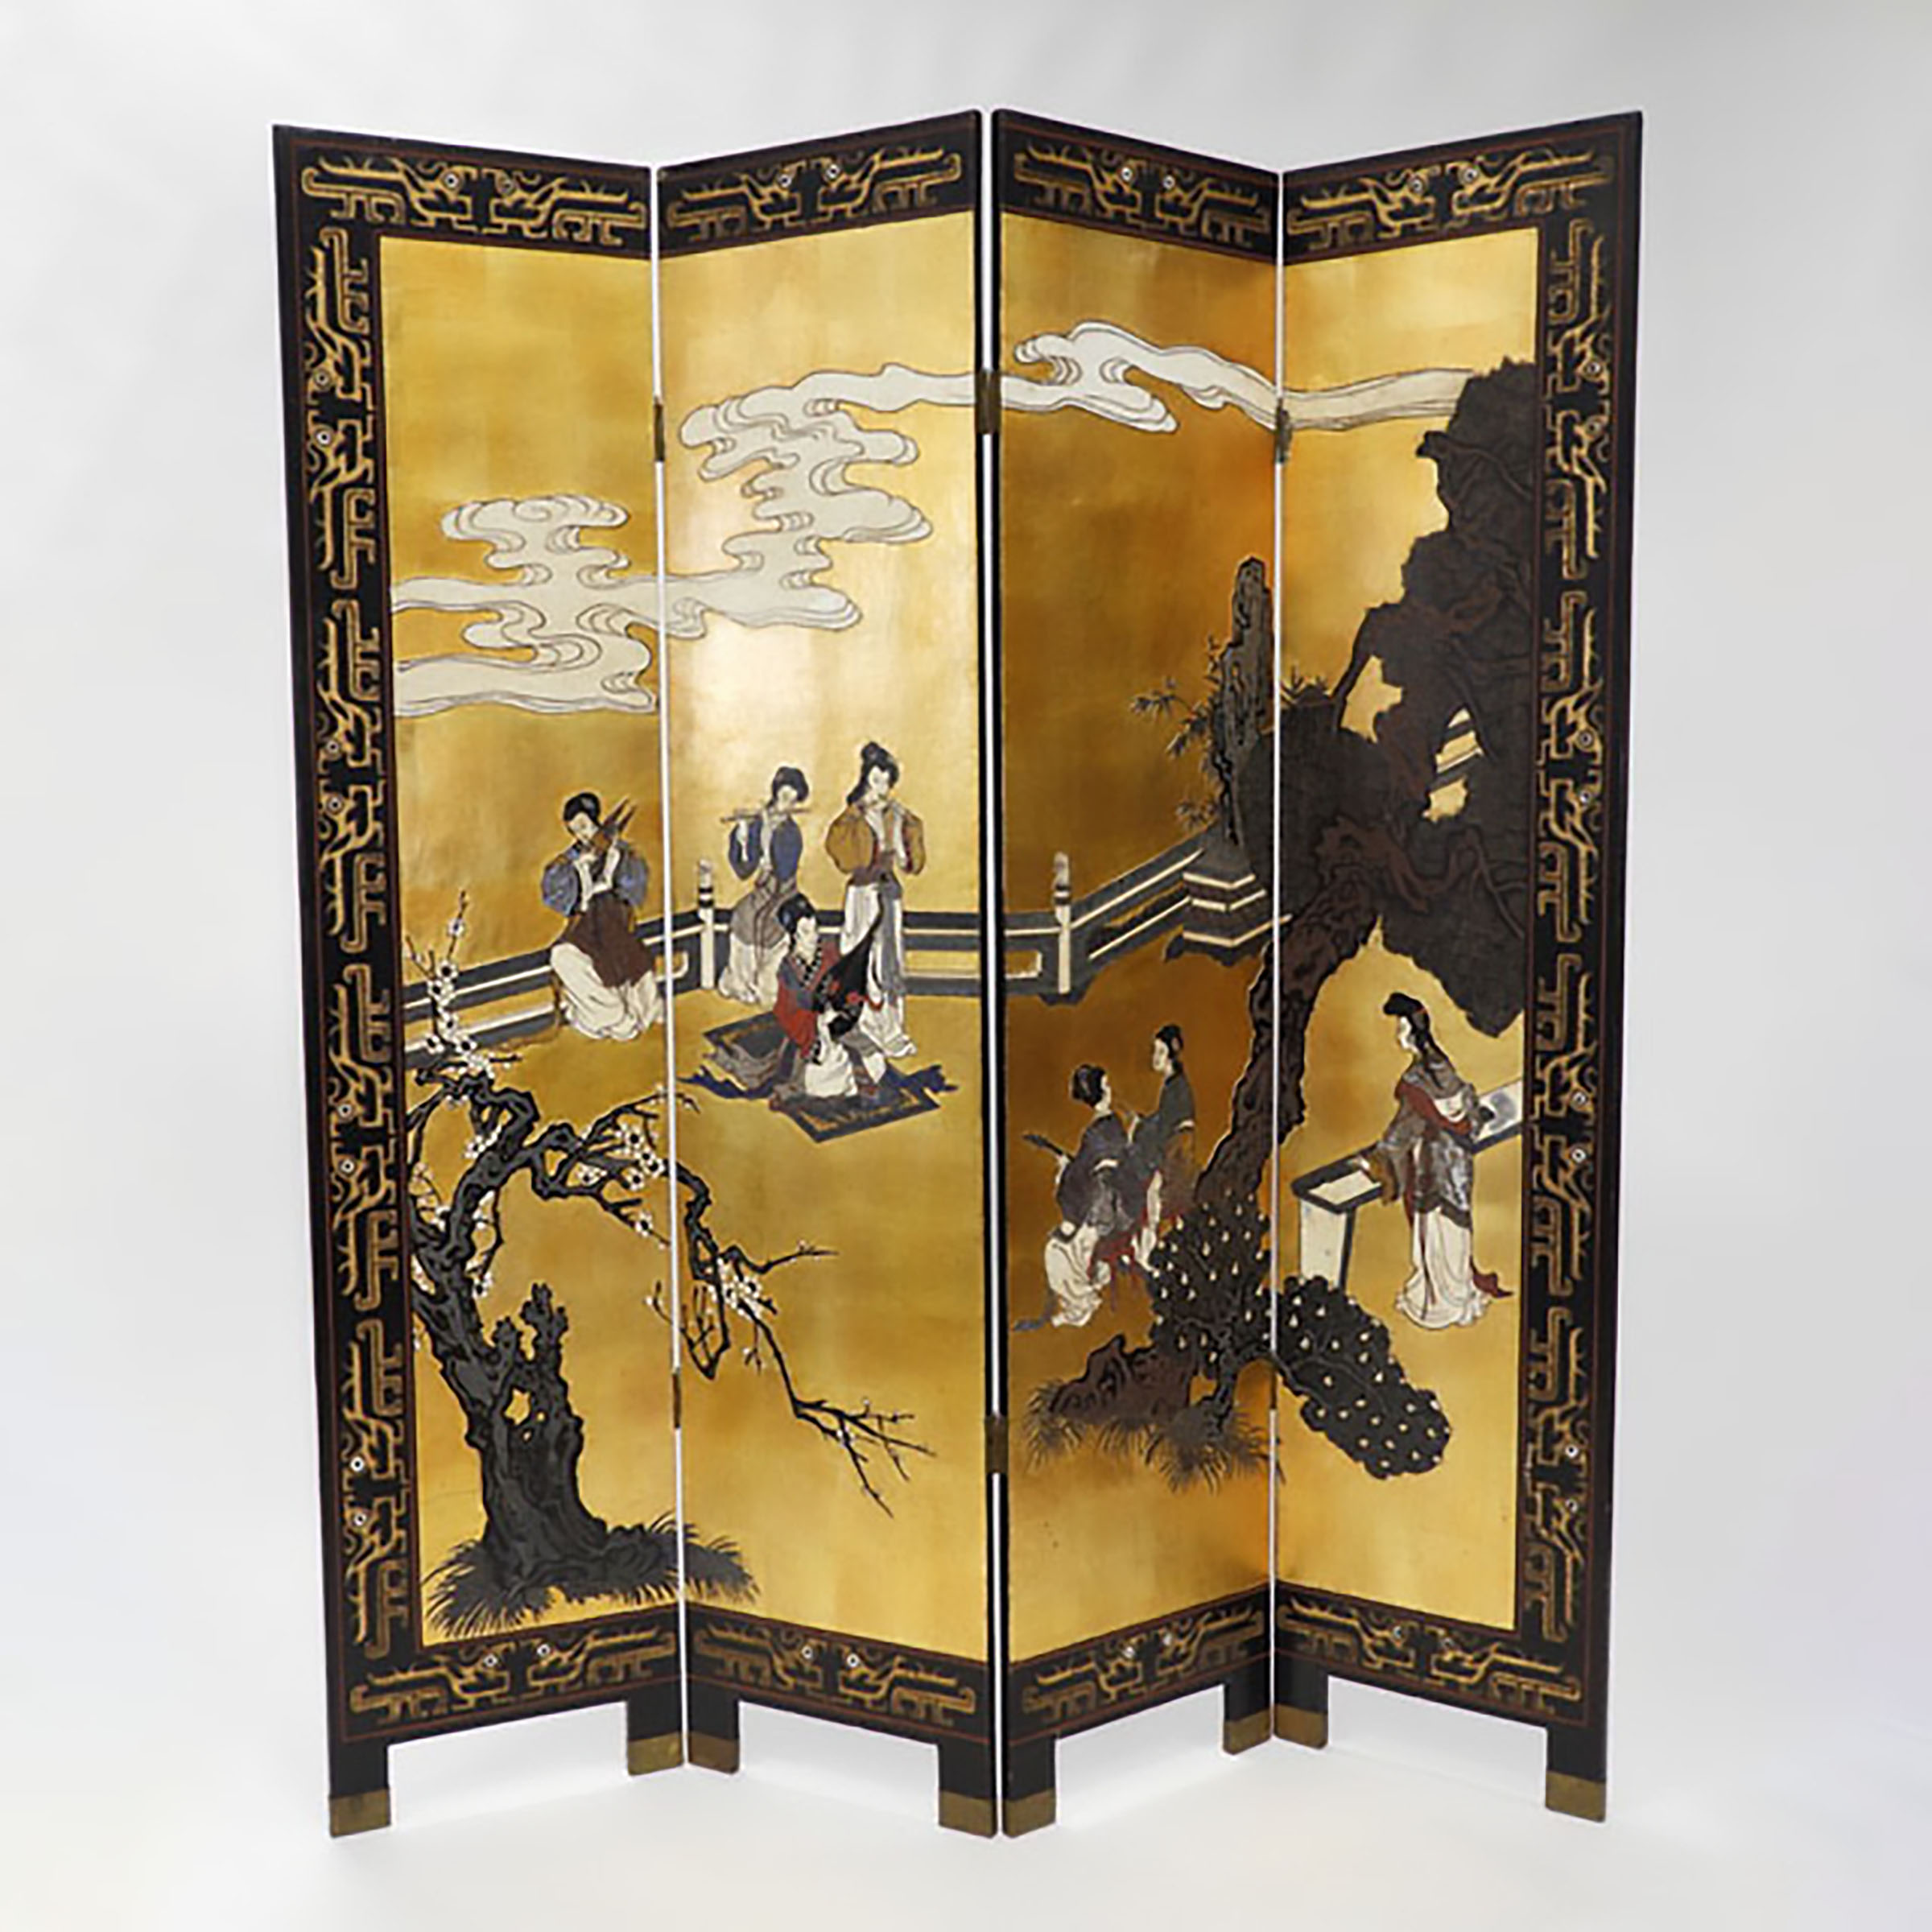 A Gold-Painted and Lacquered Four-Panel Floor Screen, Mid 20th Century